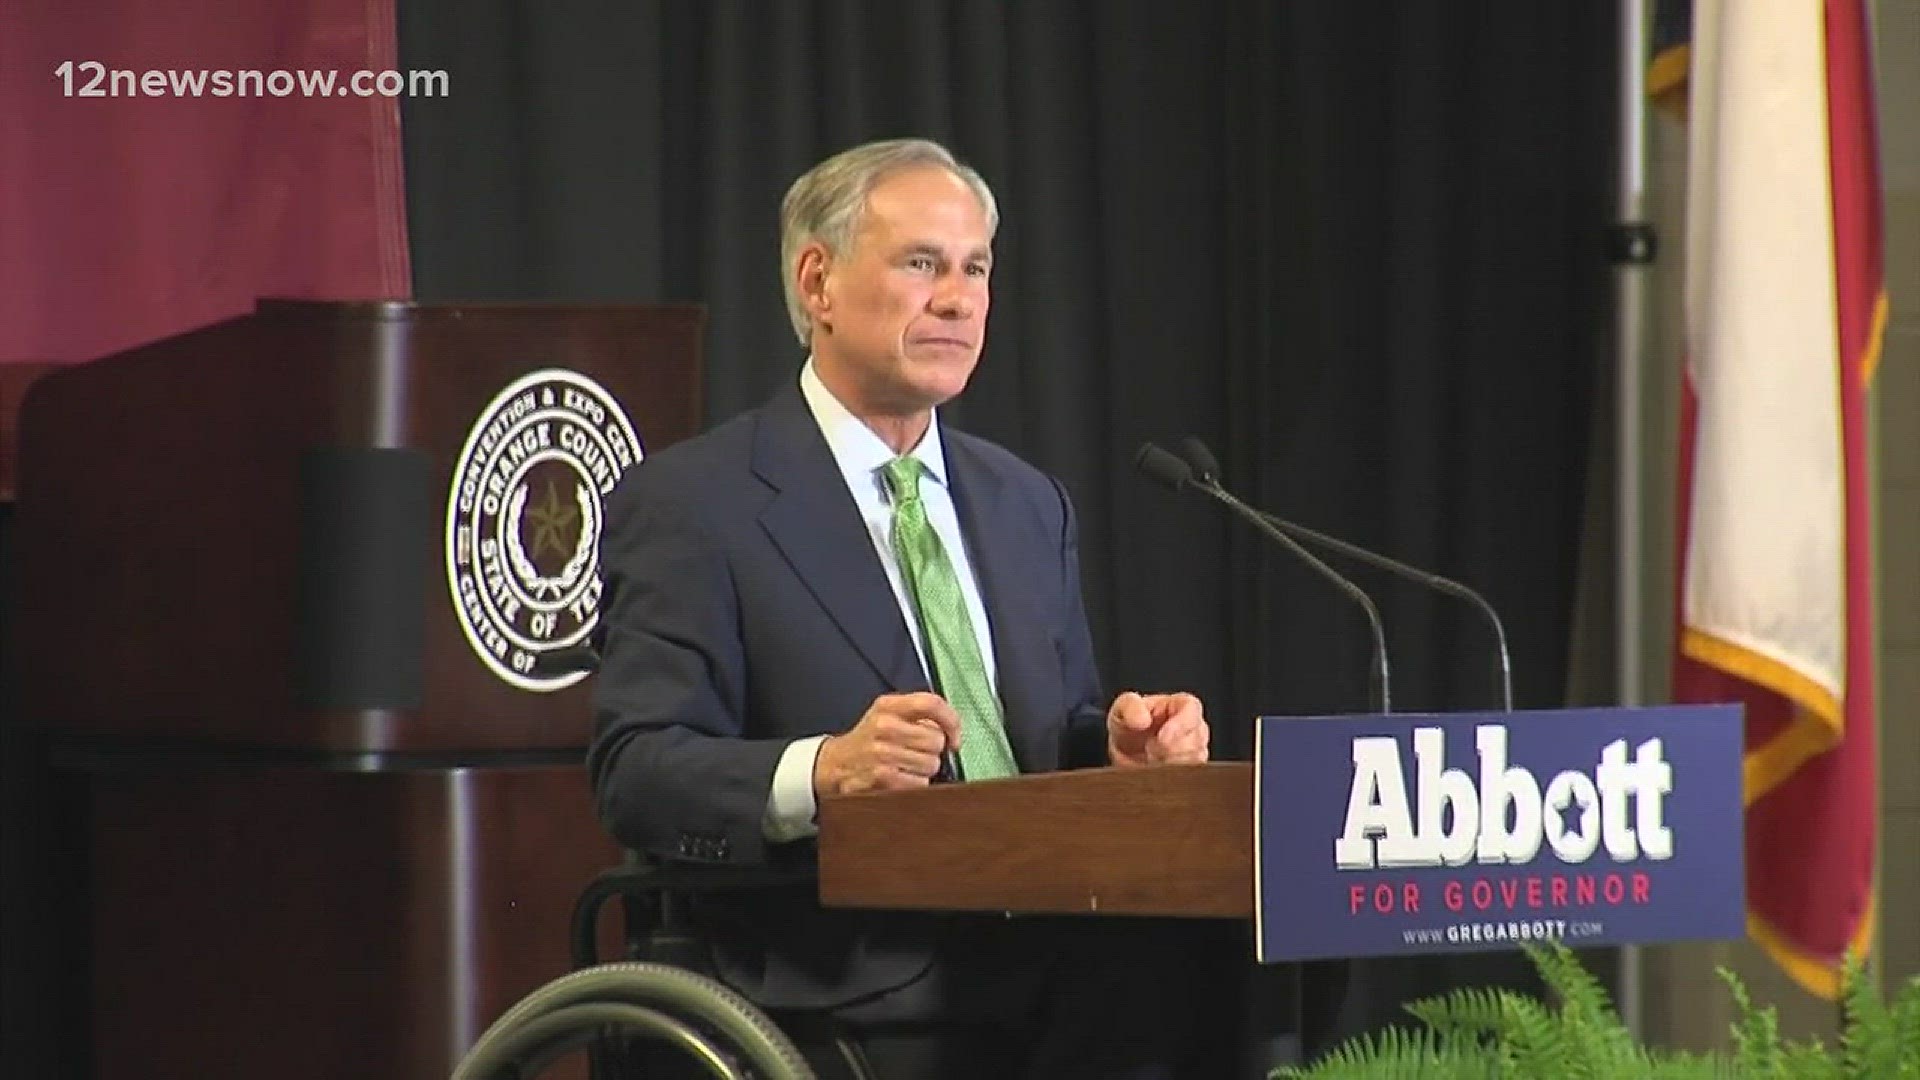 At the event, the governor discussed the state's economy, teacher salaries and sanctuary cities.